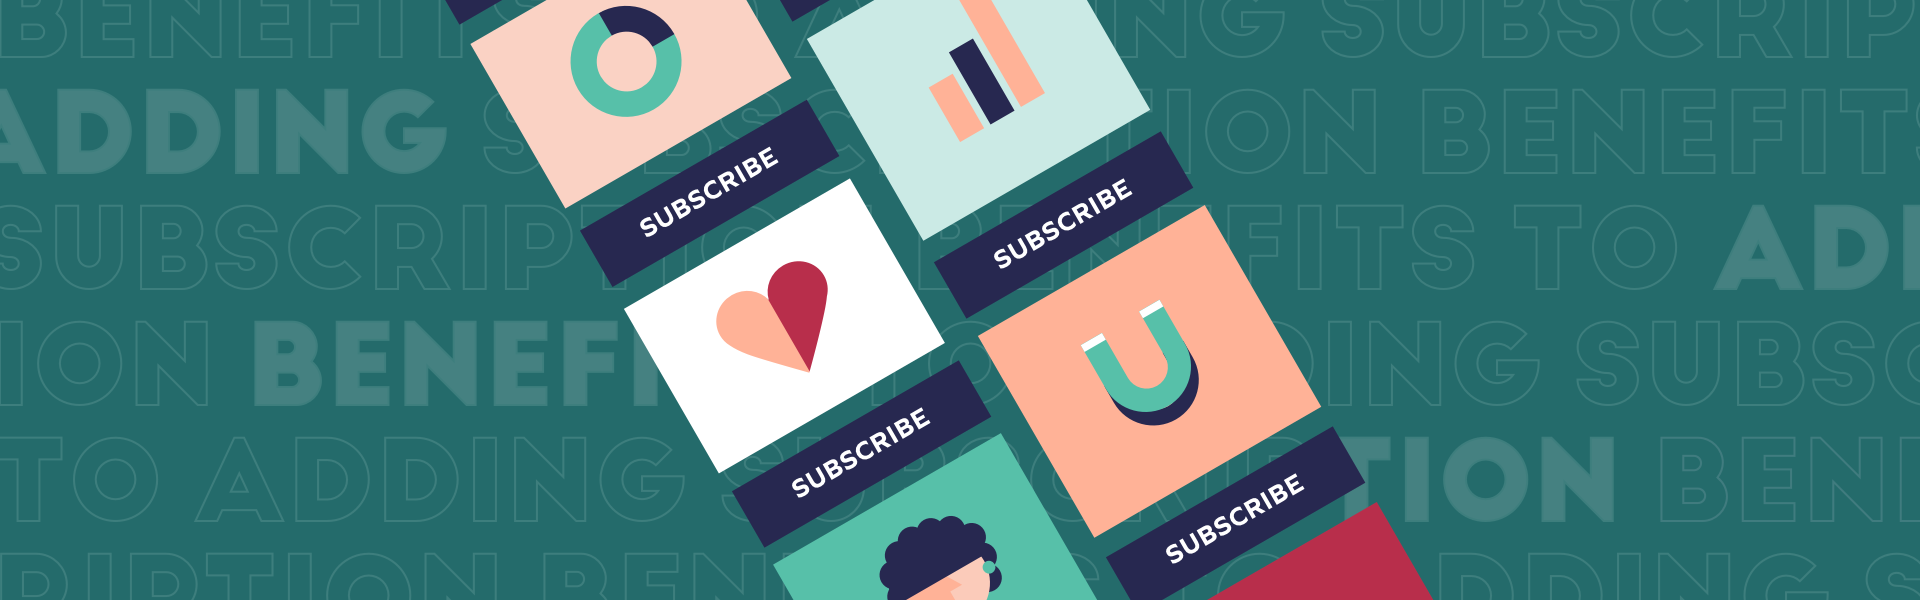 The top 5 benefits of adding a subscription model to your eCommerce business